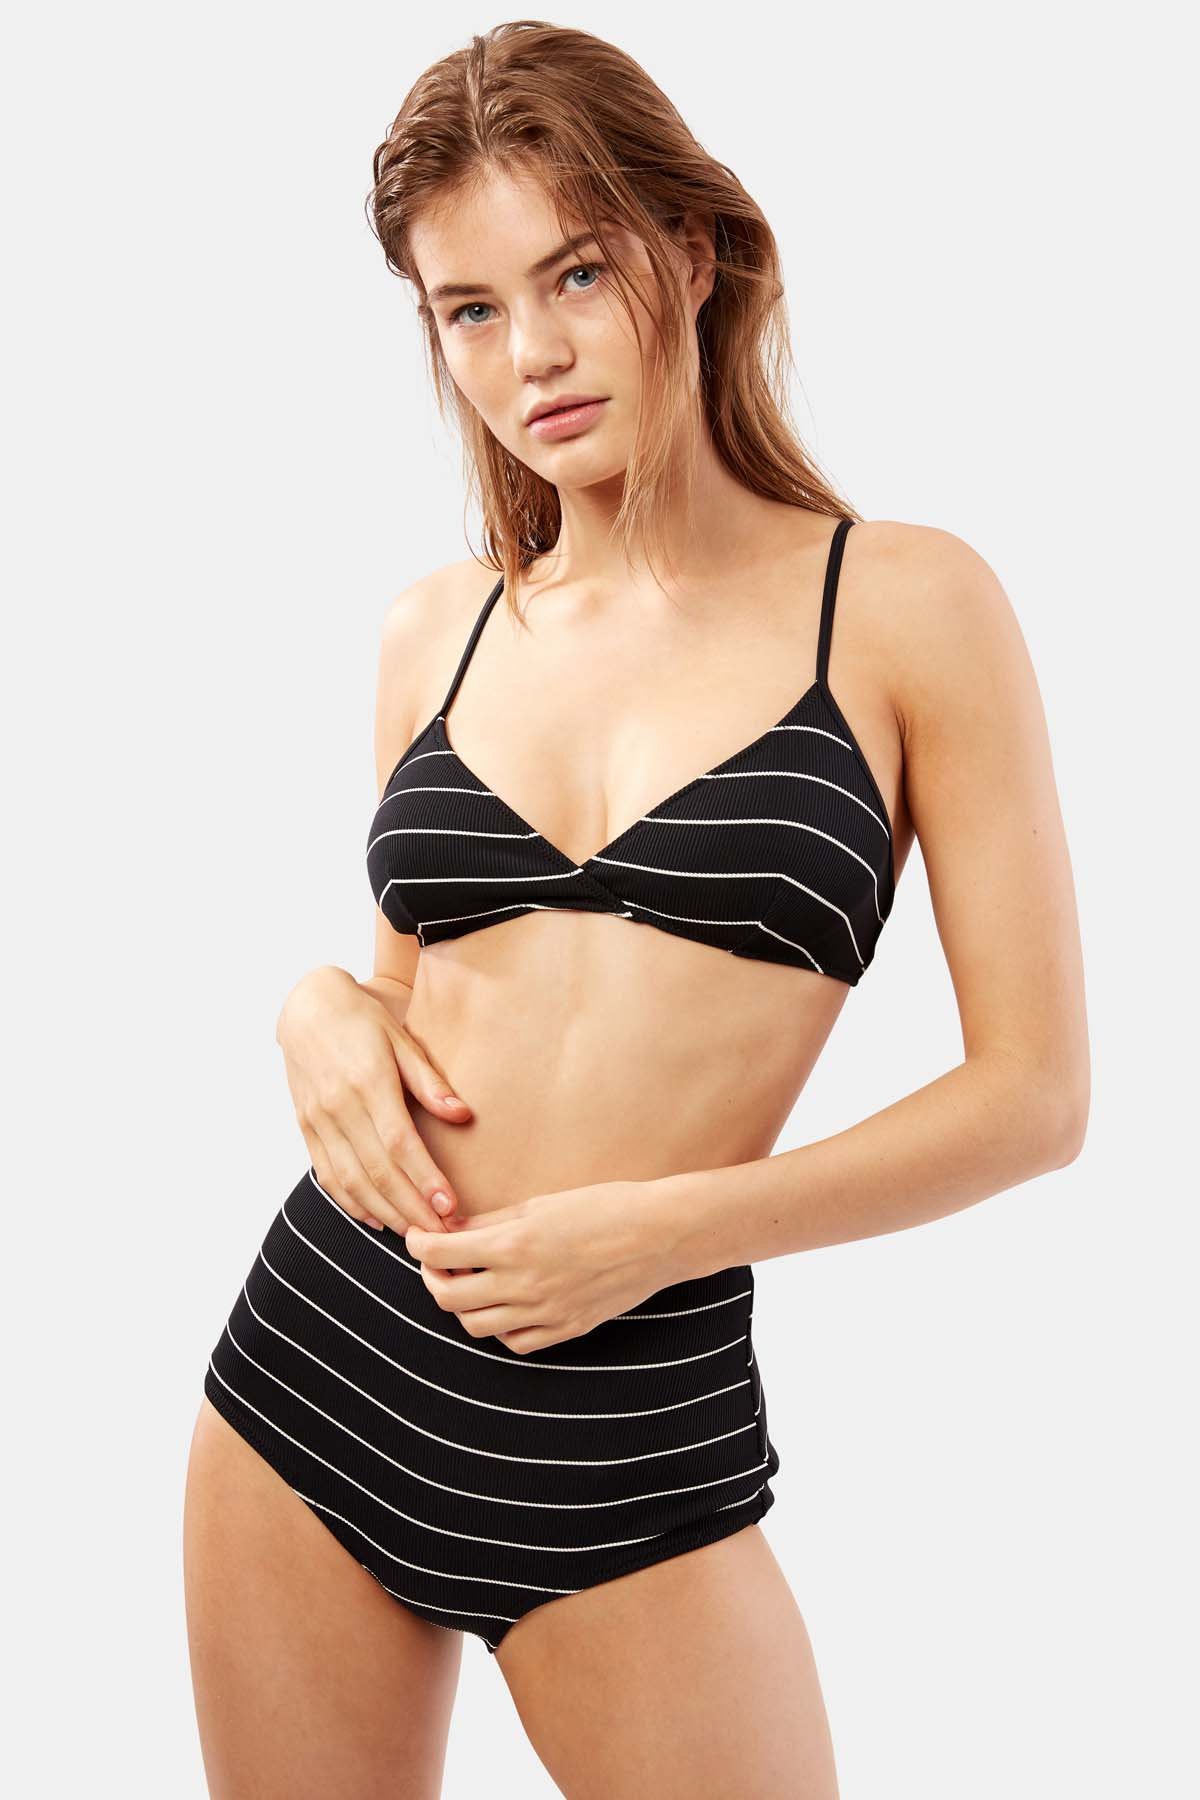 A woman wearing a BRIGITTE PINSTRIPE RIBBED SWIM BOTTOM BY SOLID AND STRIPED swimwear top.-1168886923345